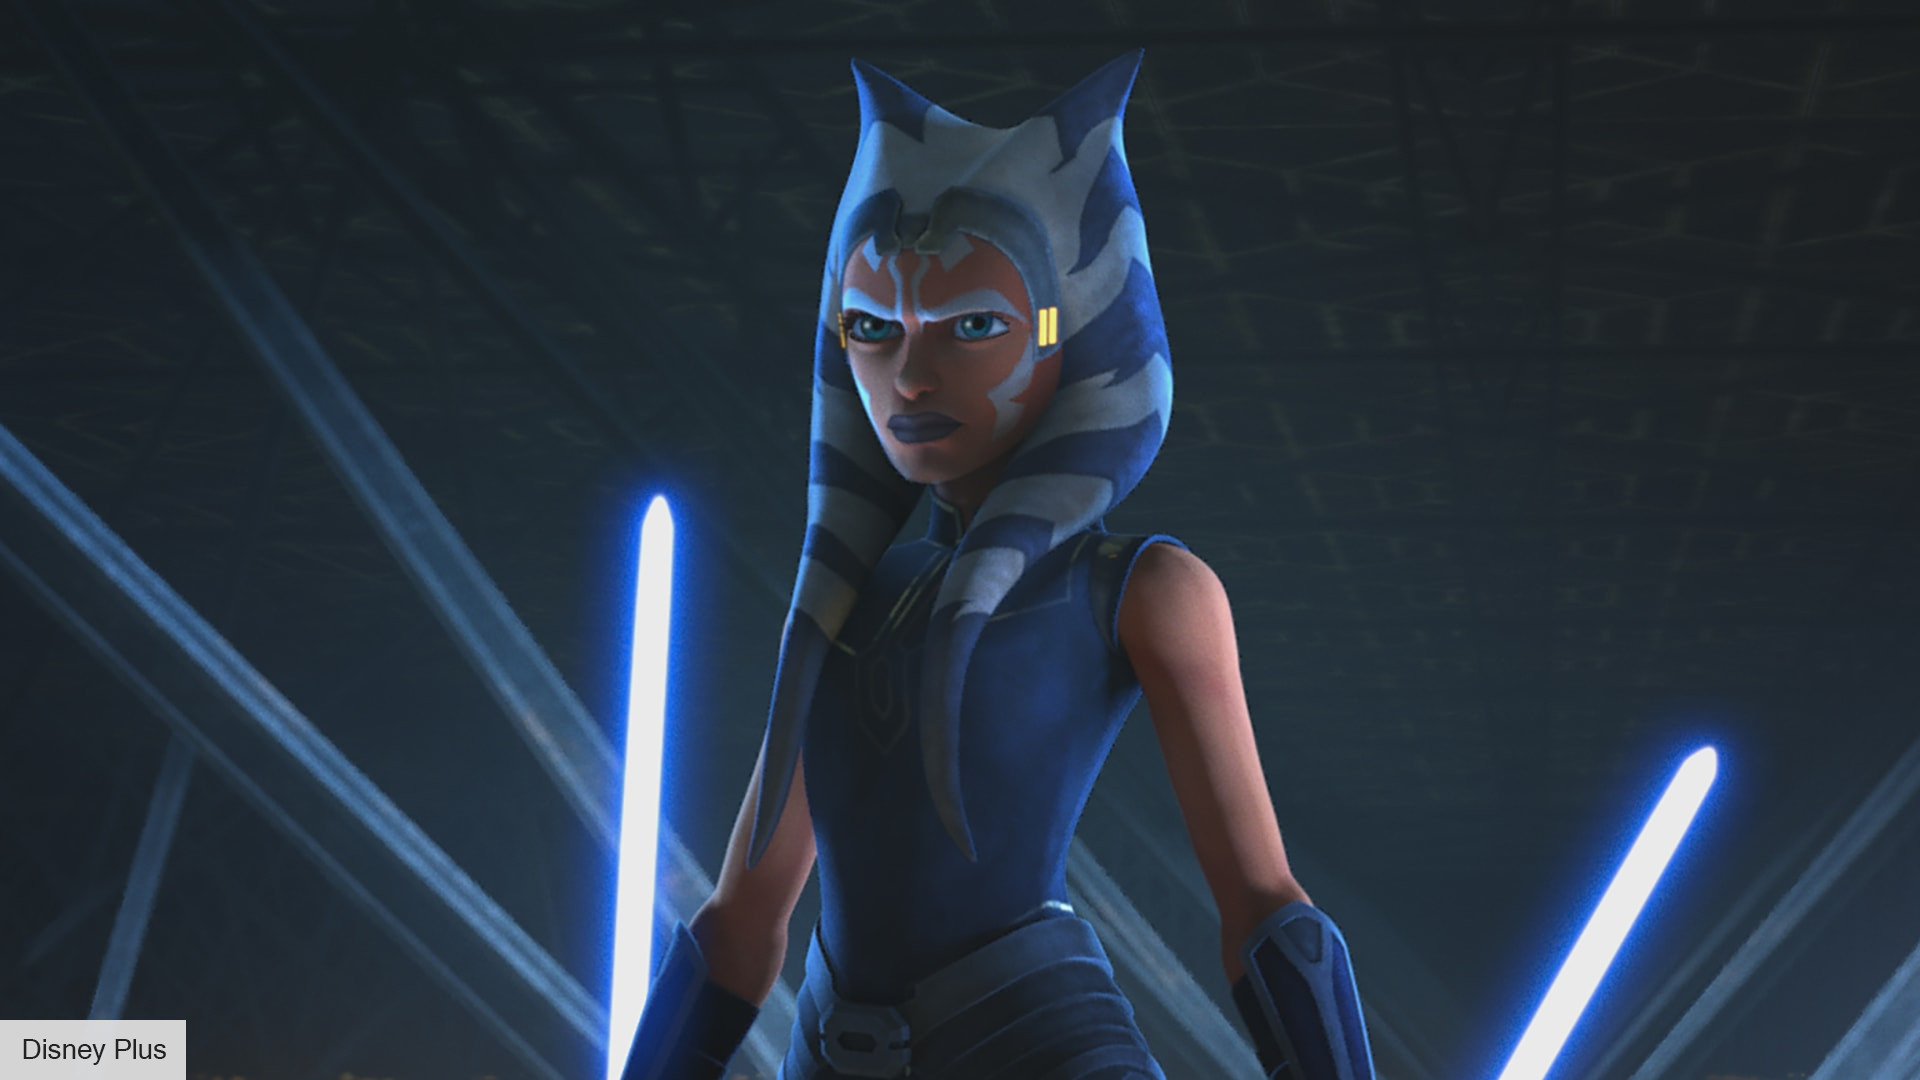 Star Wars Ahsoka release date speculation, plot, cast, and more The